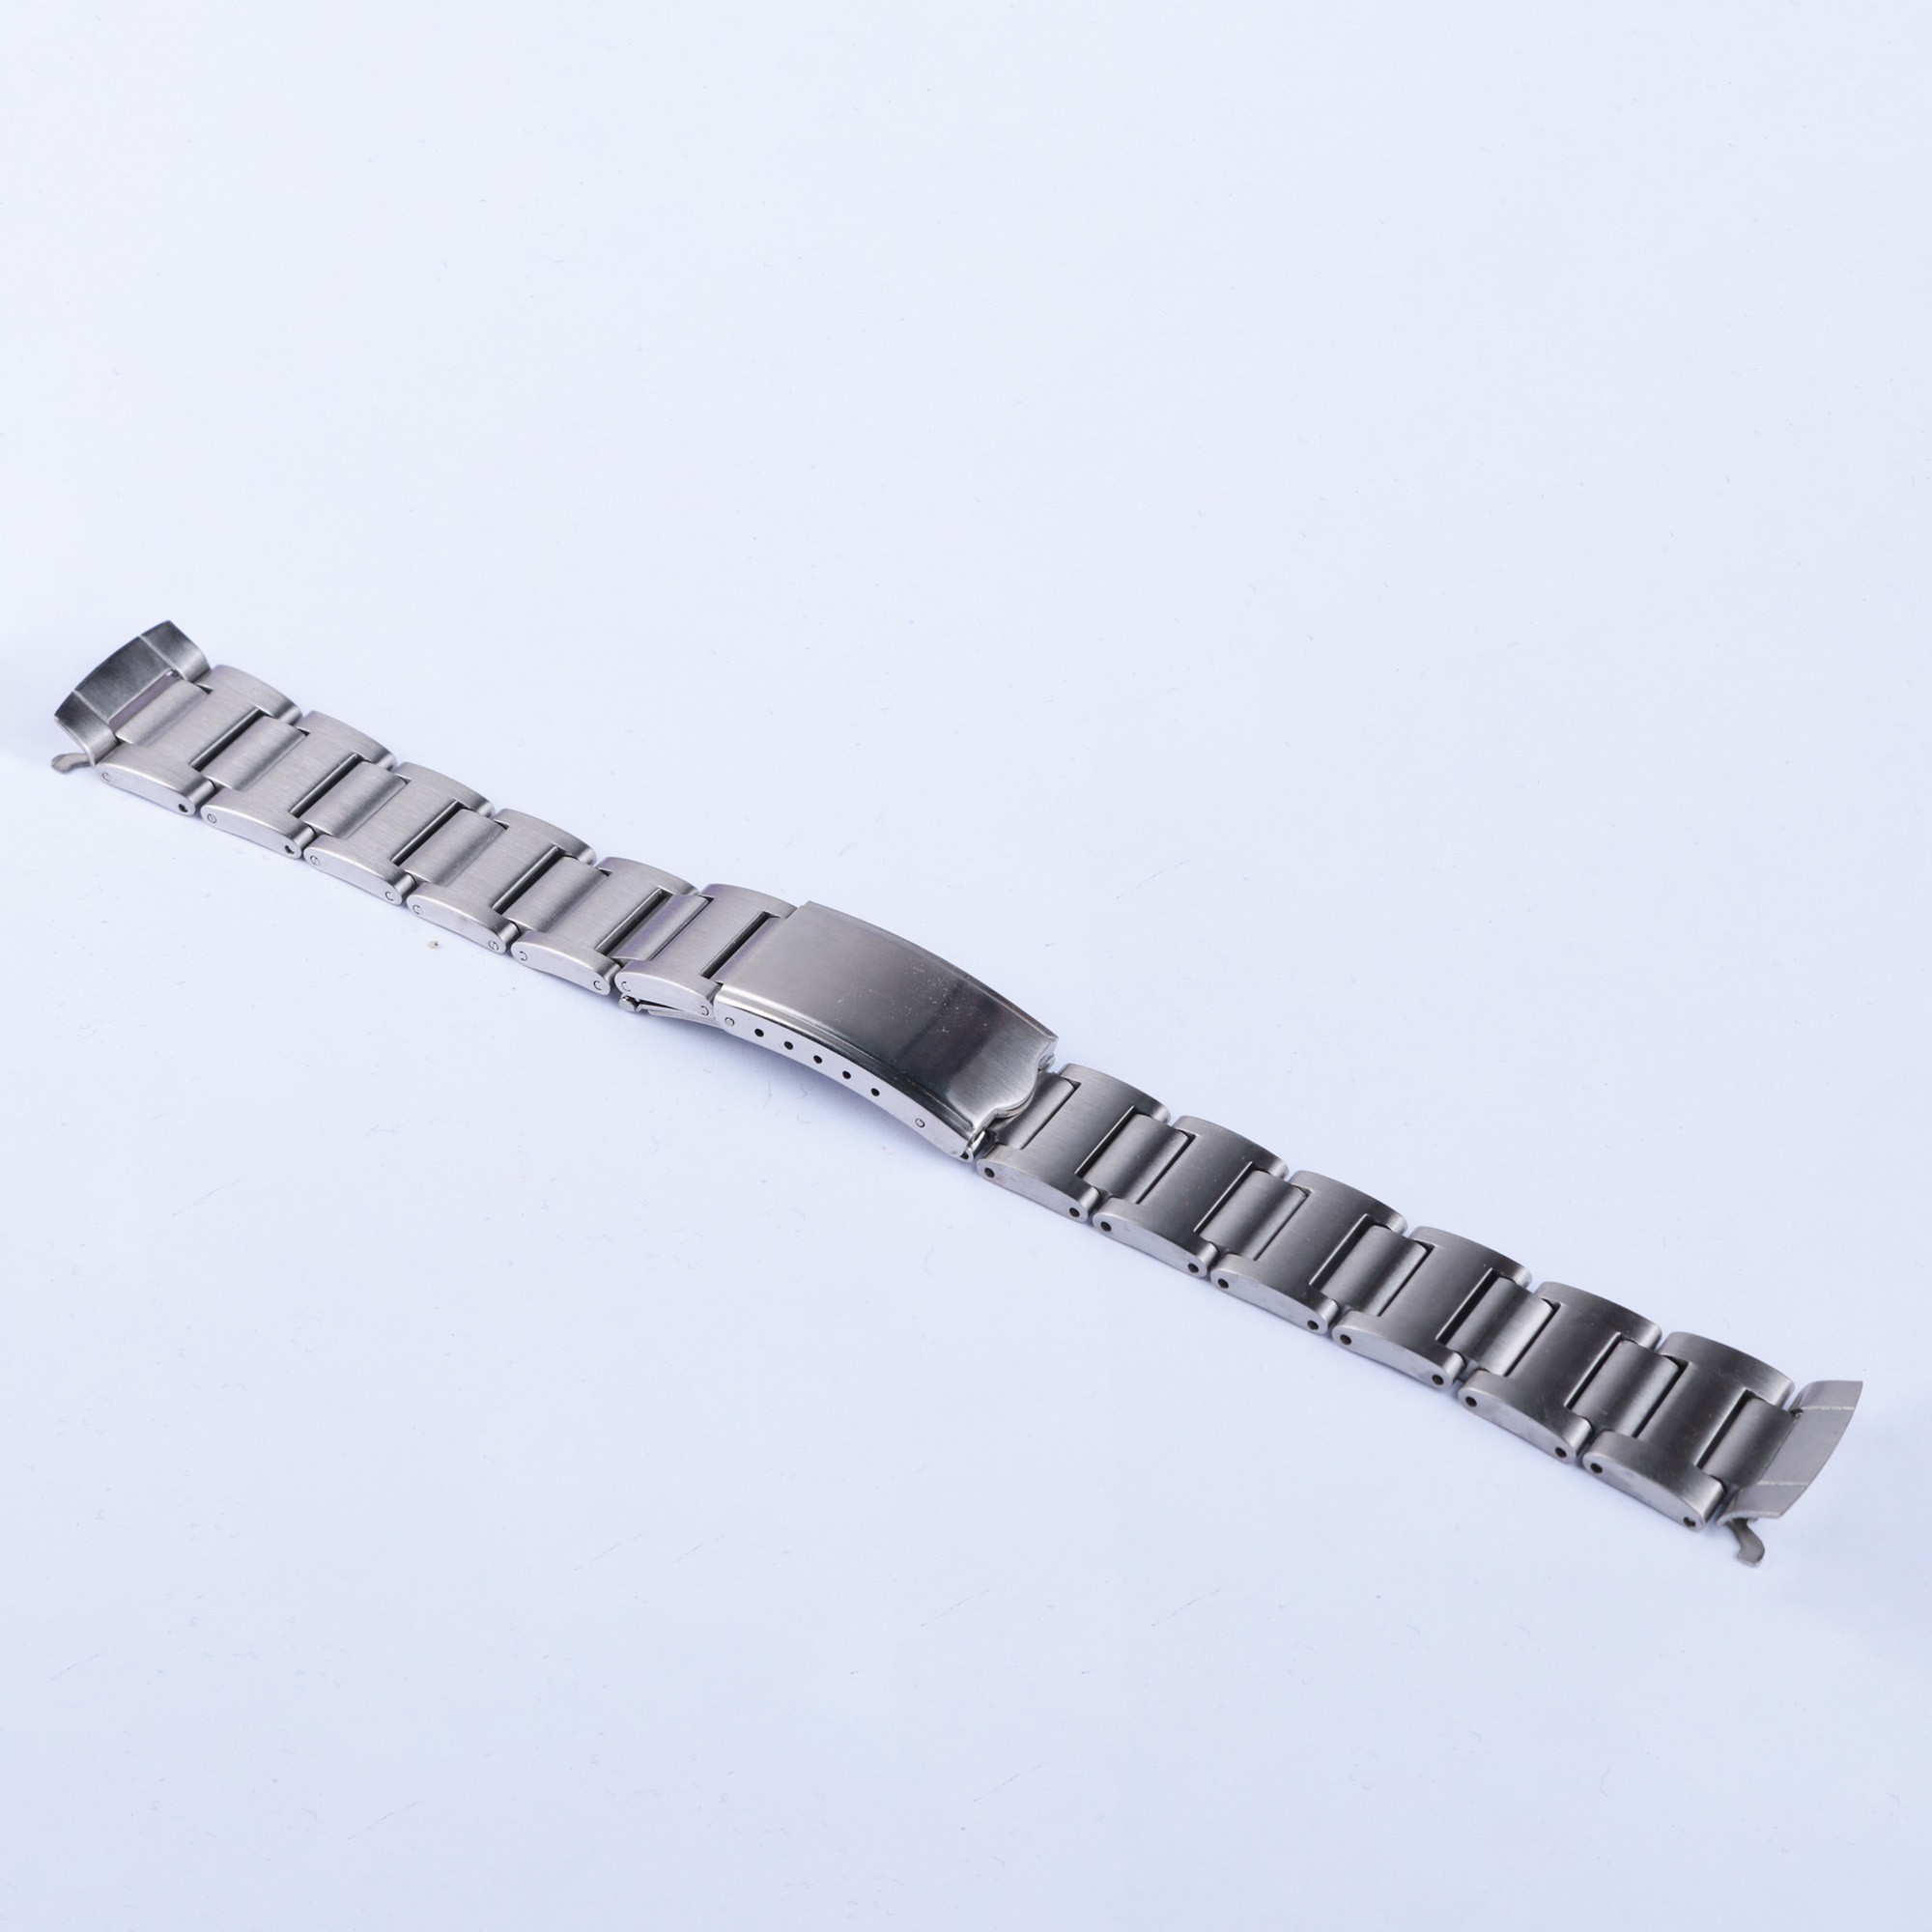 19mm Vintage 316L Hollow Curved End Watch Strap Band Bracelet for Seiko Watch 6139-6002 6000 6001 6005 6032 Chrono